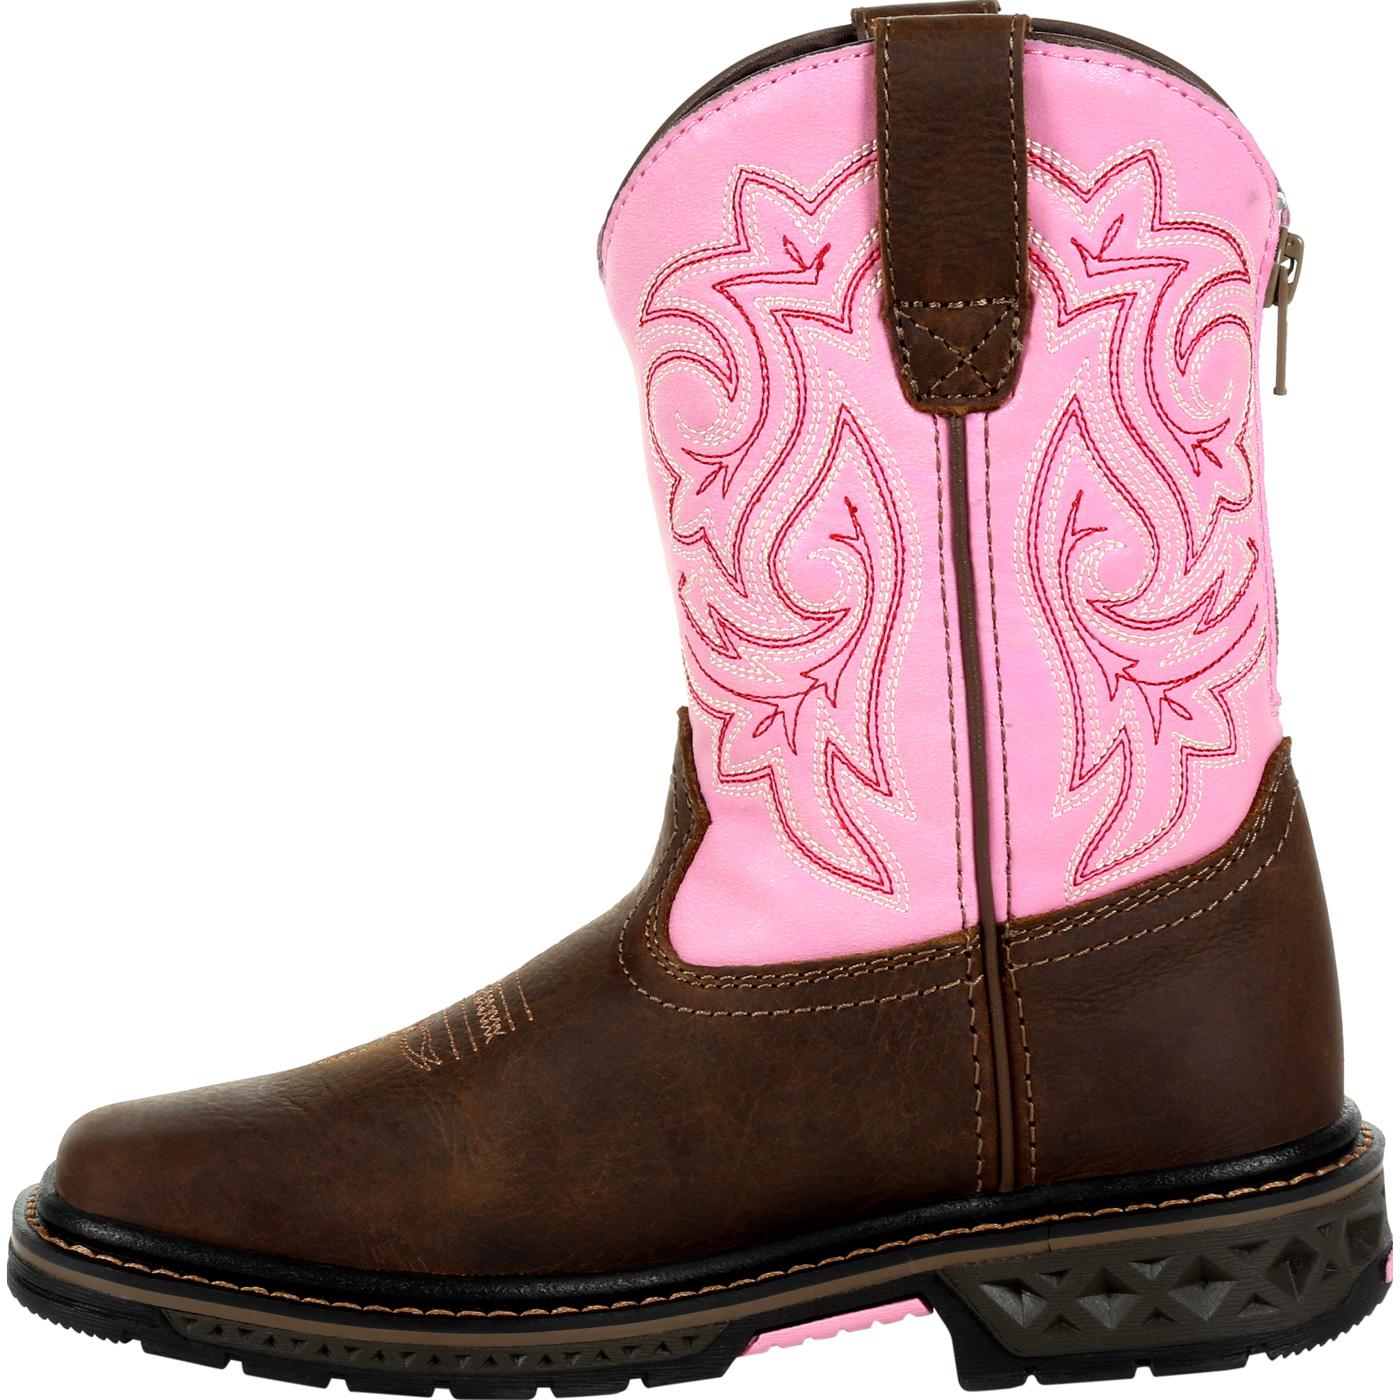 Georgia | Little Kid's Boot Carbo-Tec LT Pull On Boot | Brown / Pink - Outback Traders Australia